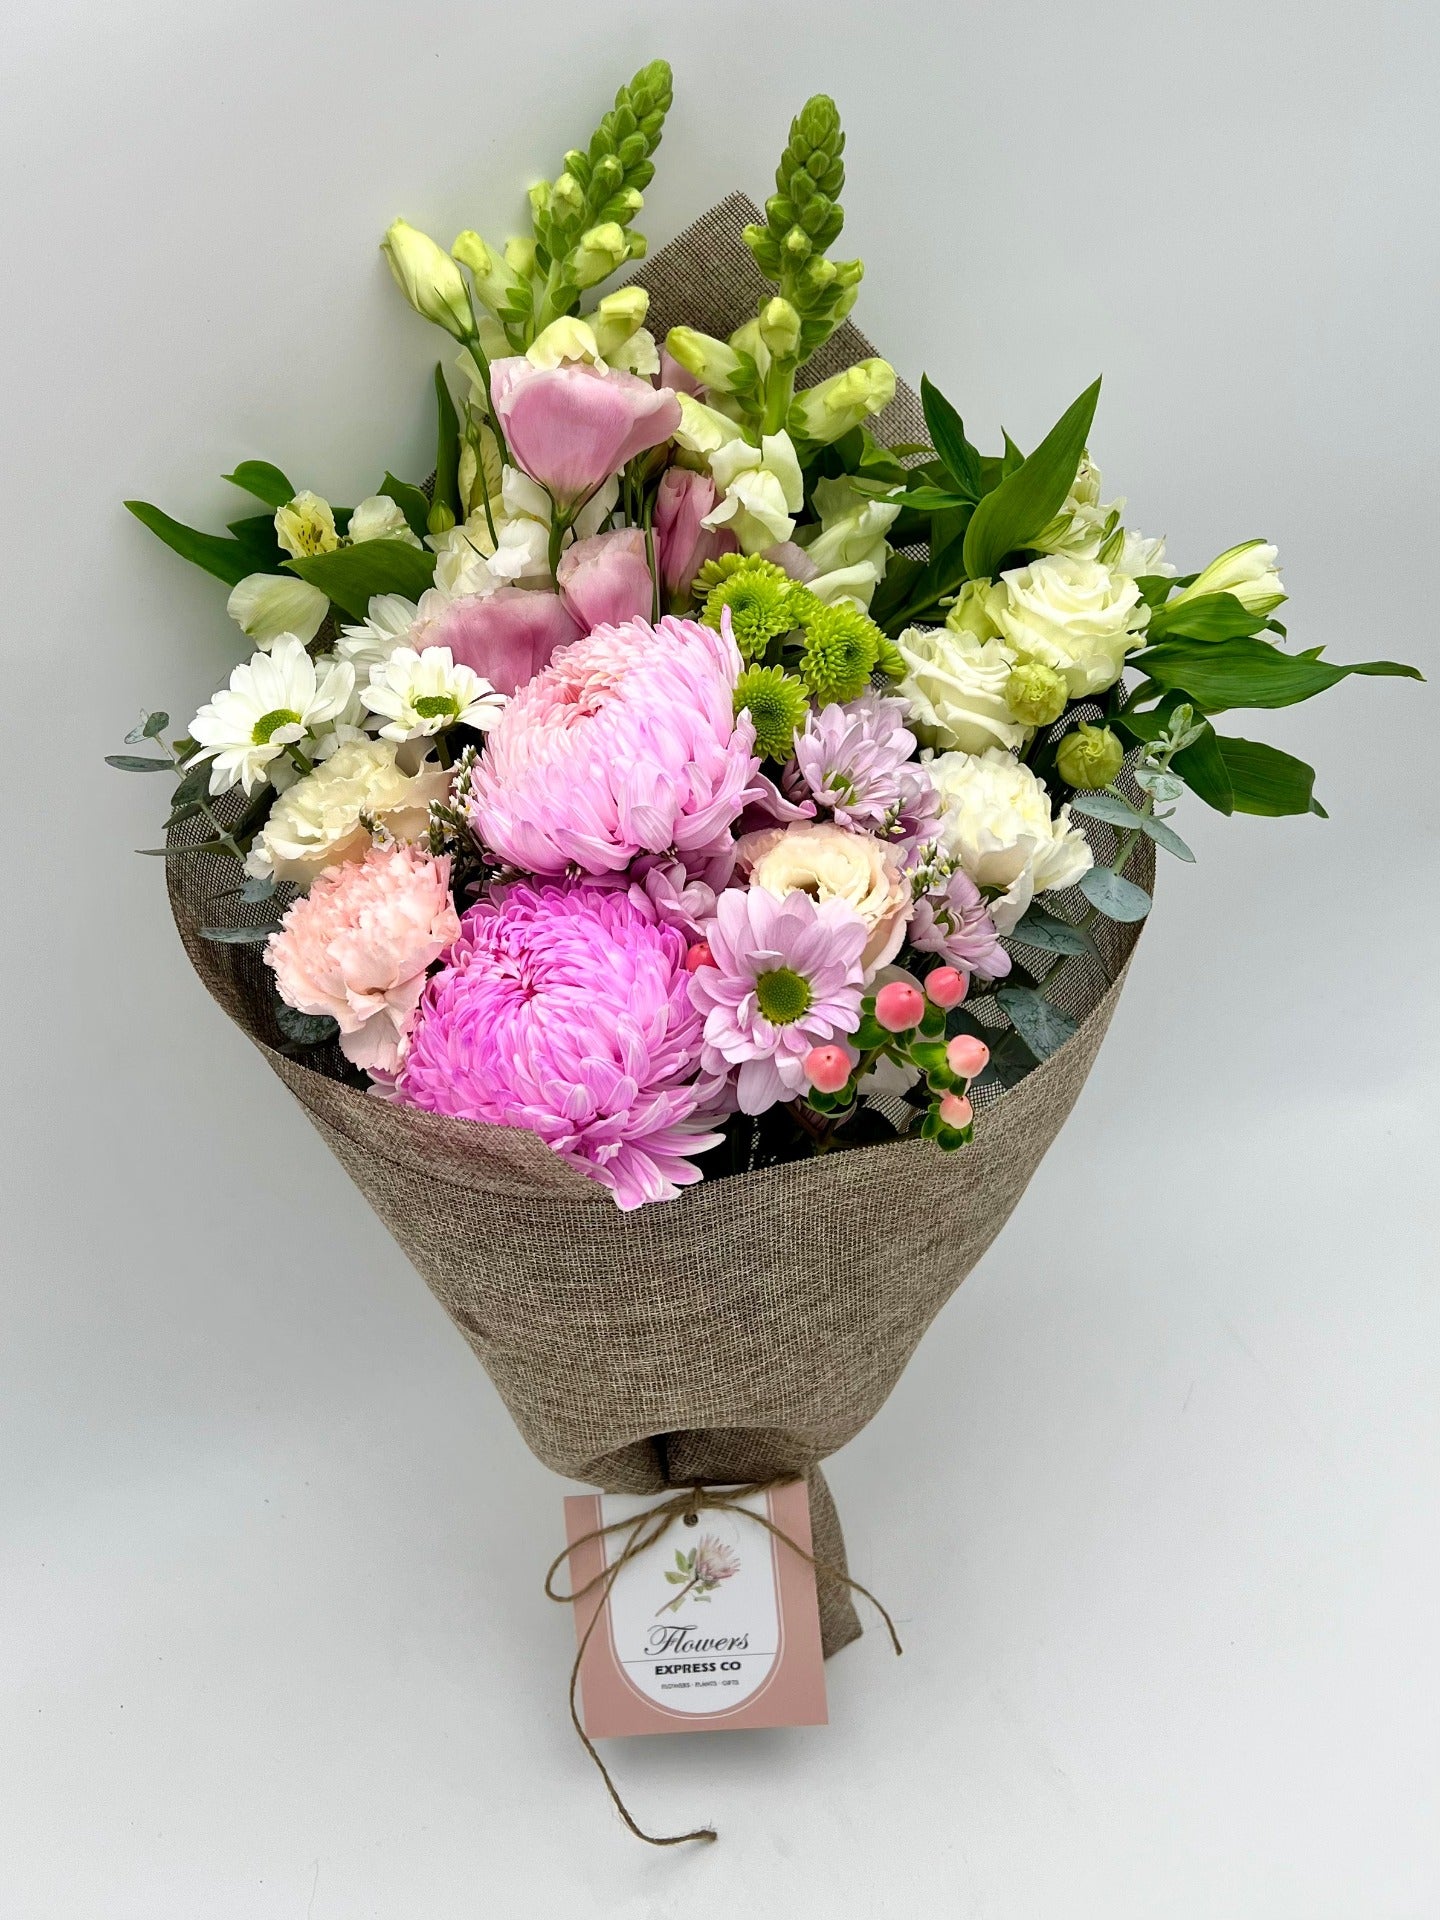 Medium pink and white mixed flowers wrapped in a hessian-feel mesh against a white wall background. Great for gifting and decorating, available for delivery in Melbourne, VIC.